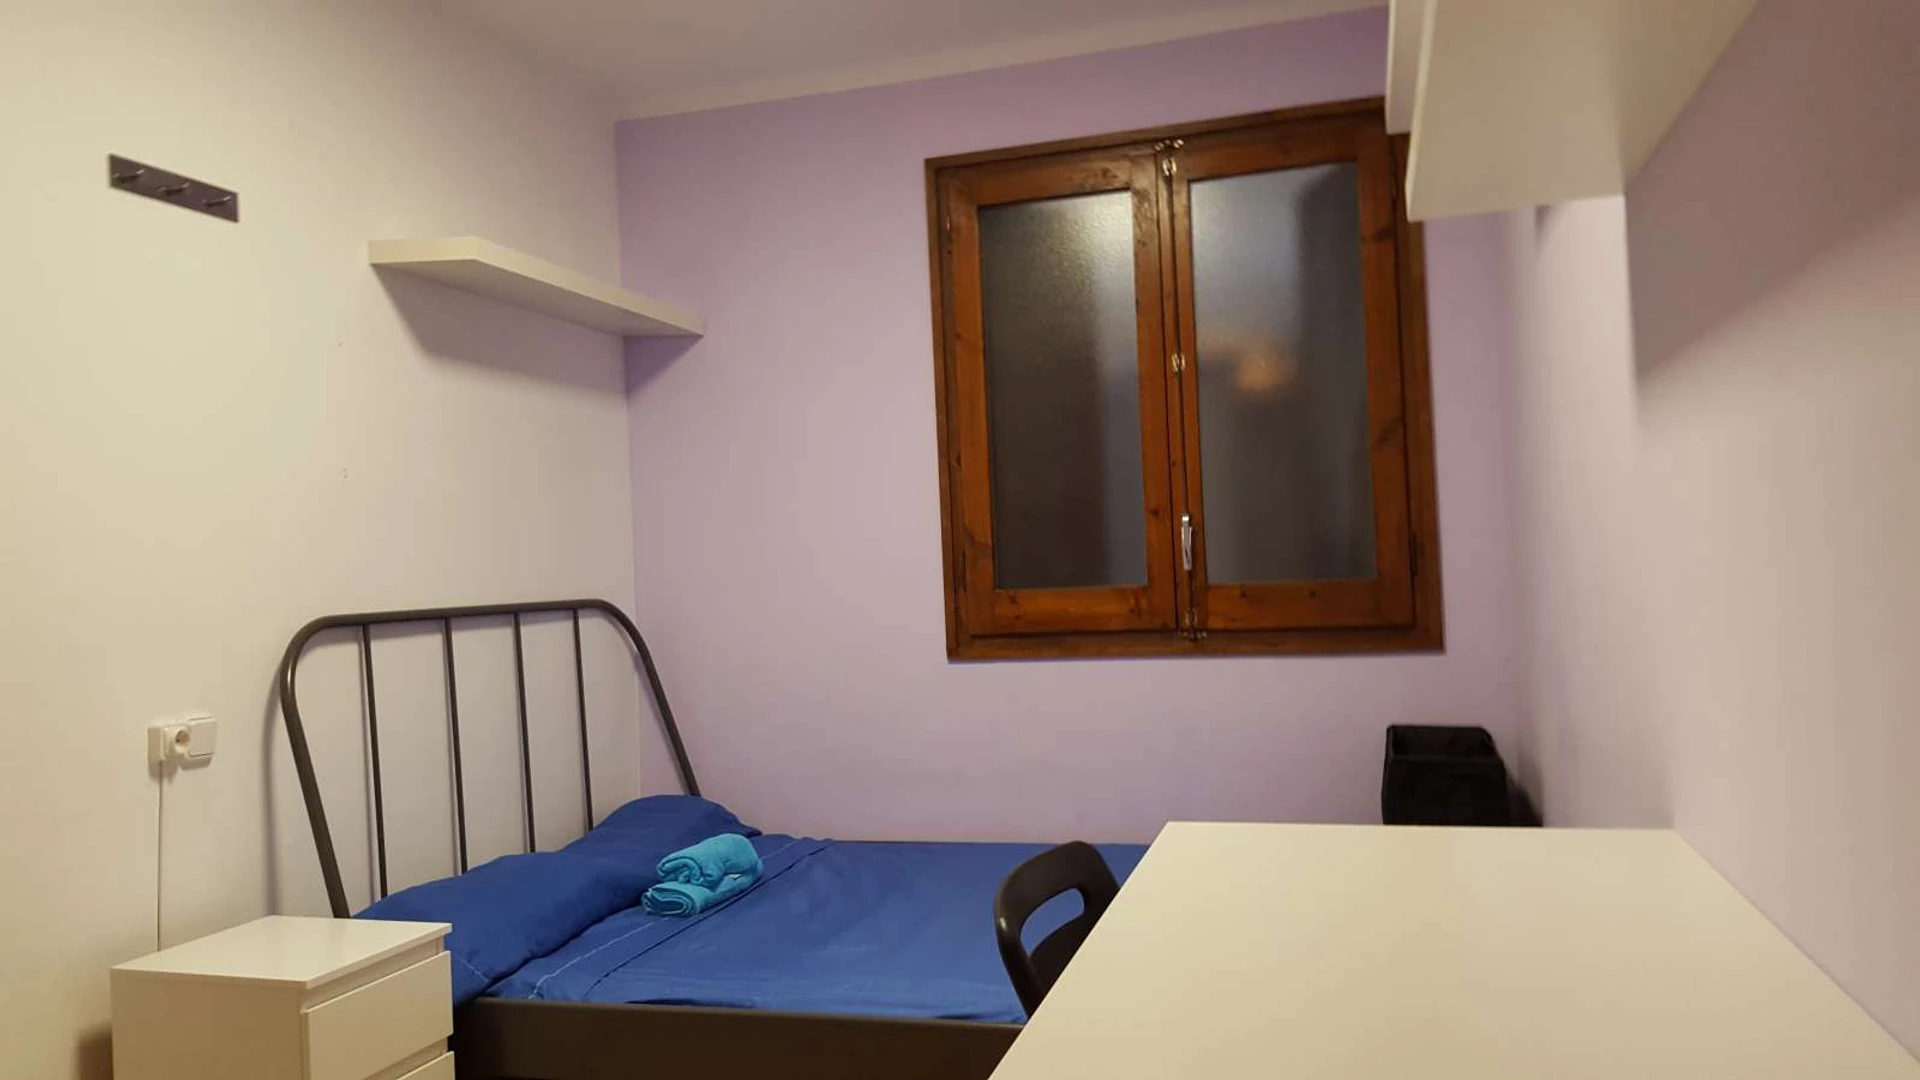 Room for rent in a shared flat in Mataró